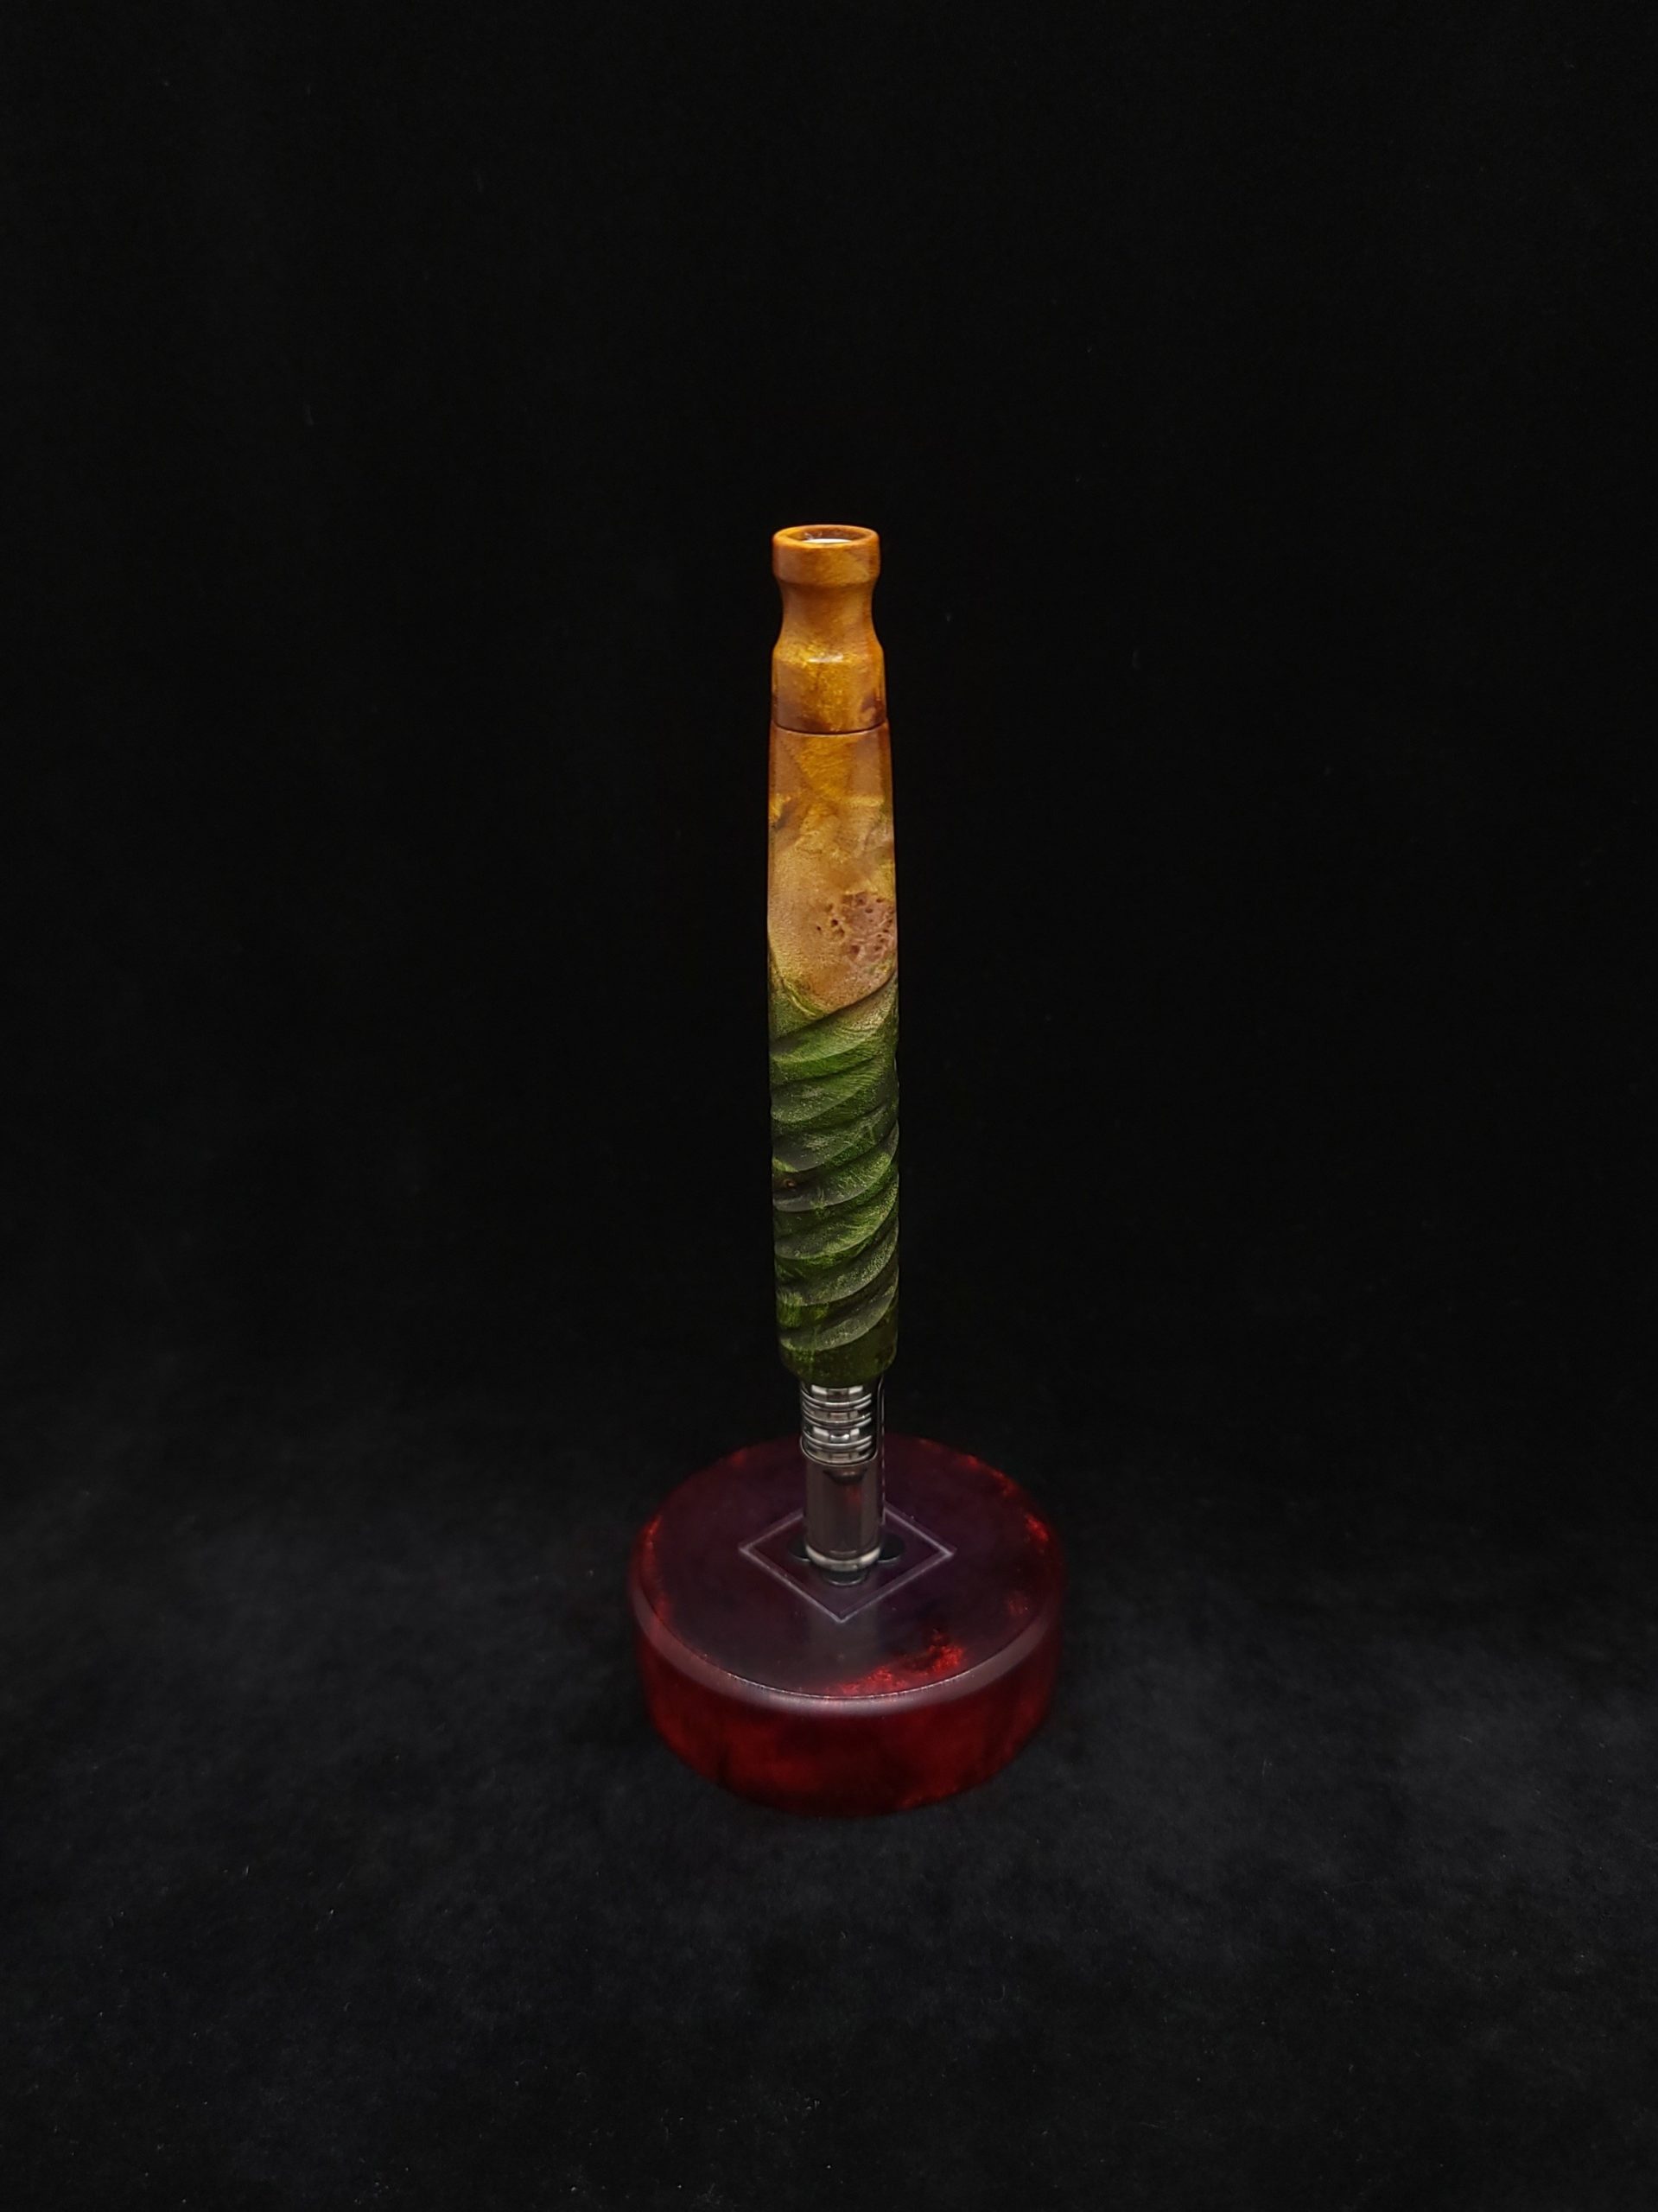 This image portrays Cosmic Burl-Eclipse XL Dynavap Stem + Matching Mouthpiece by Dovetail Woodwork.